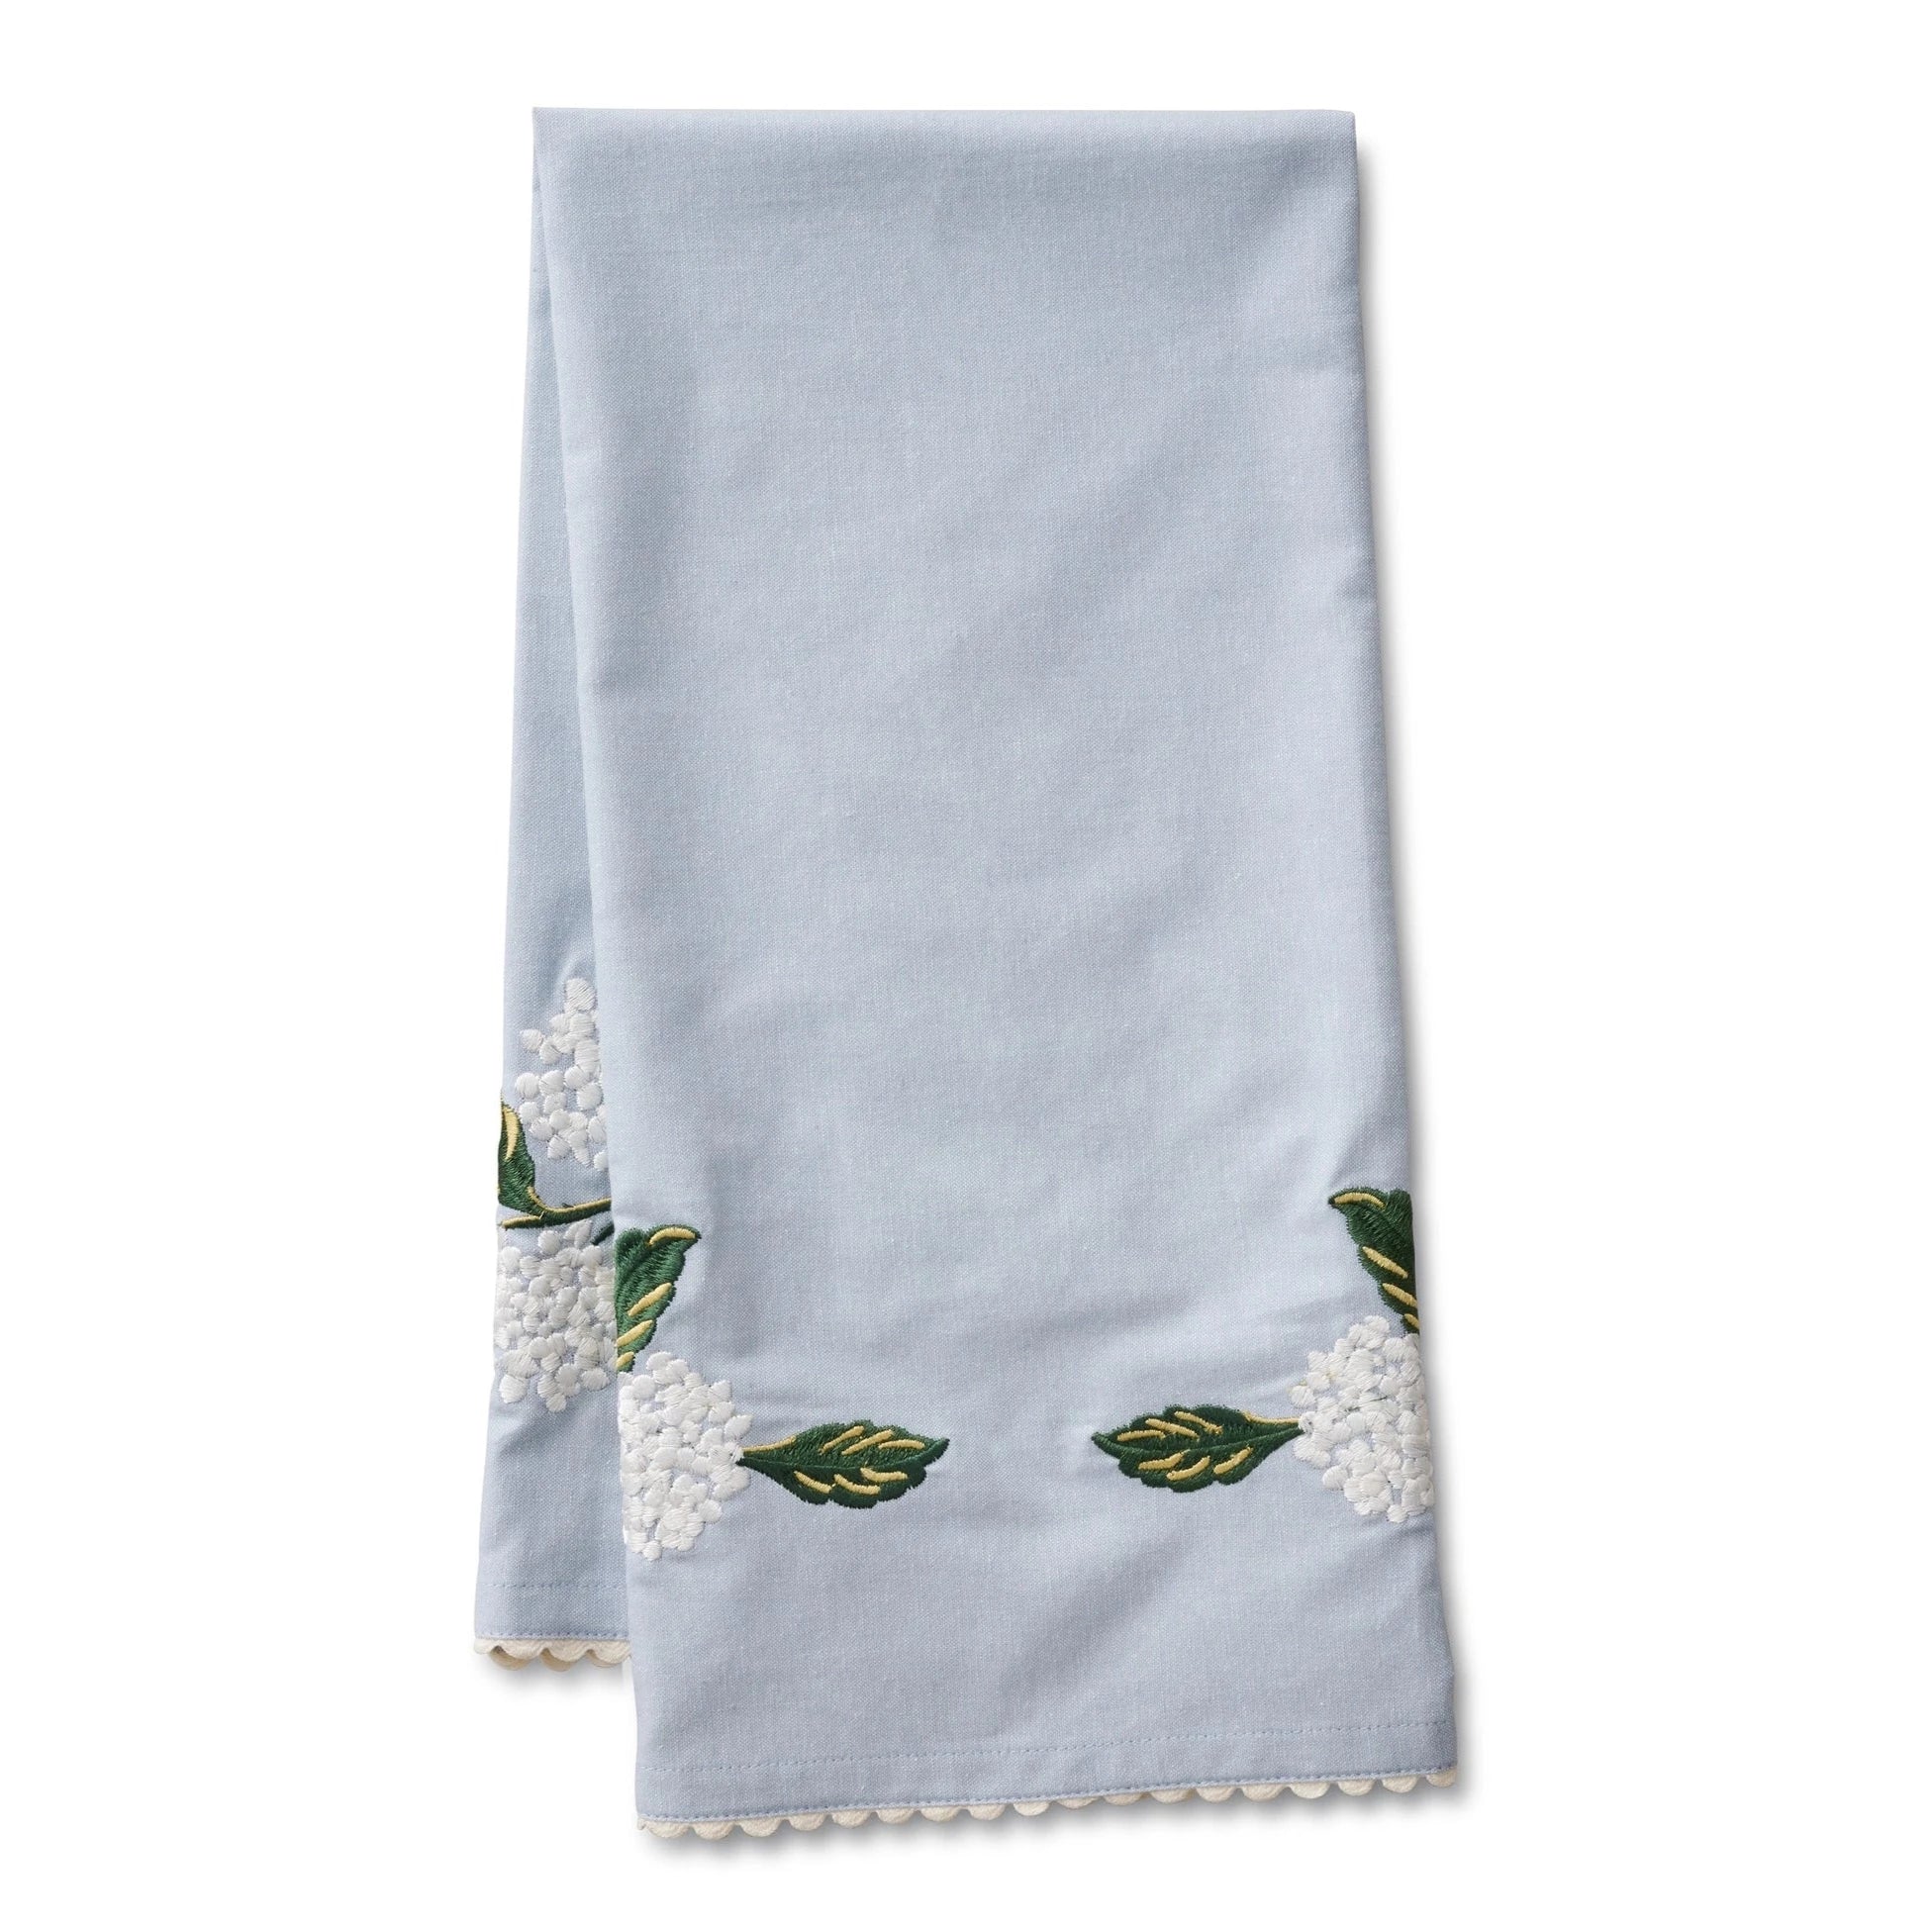 blue tea towel with white hydrangeas and green stems embroidered on it